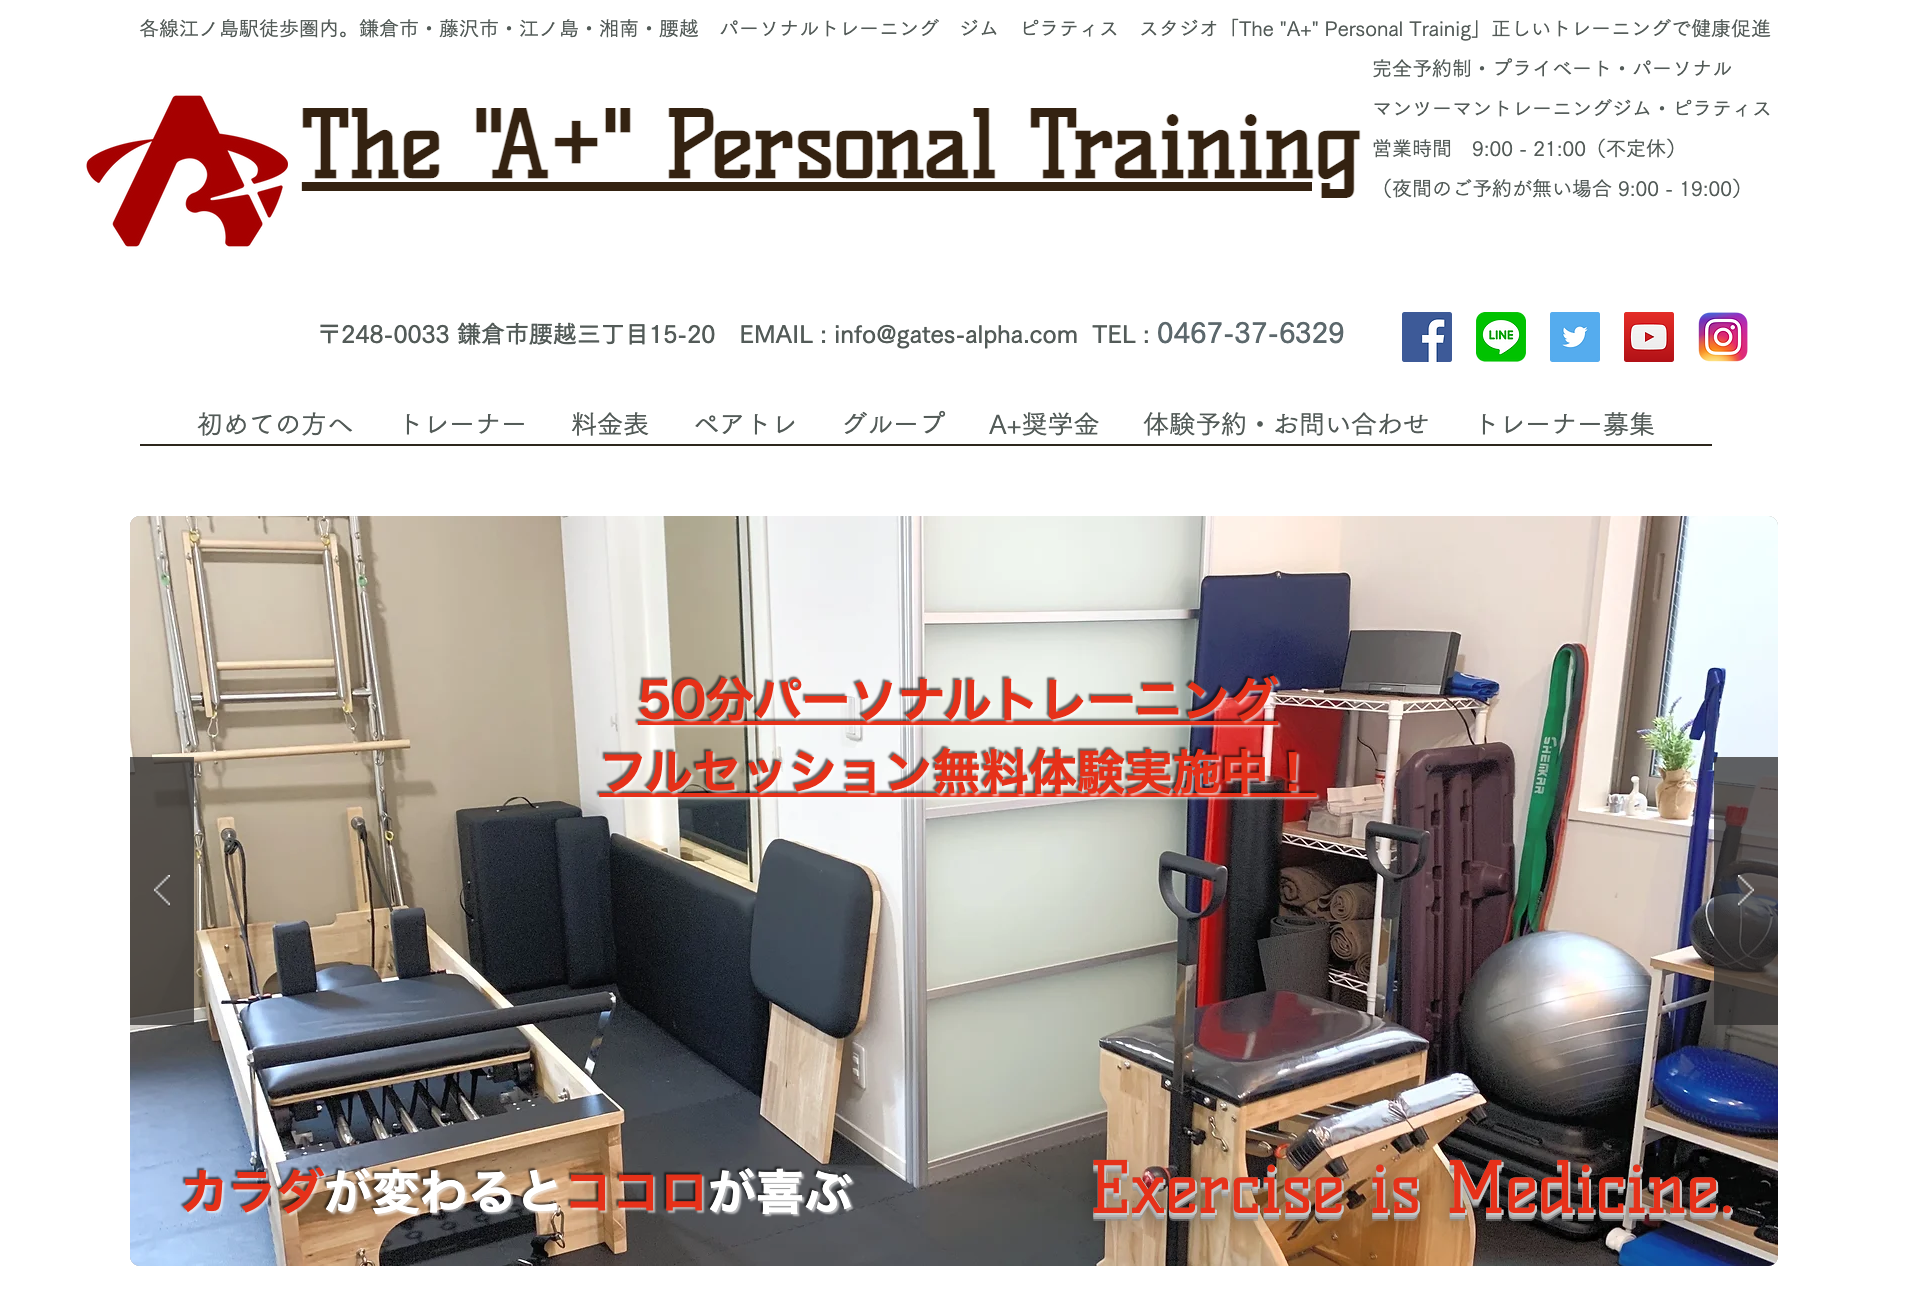 The “A+” Personal Training